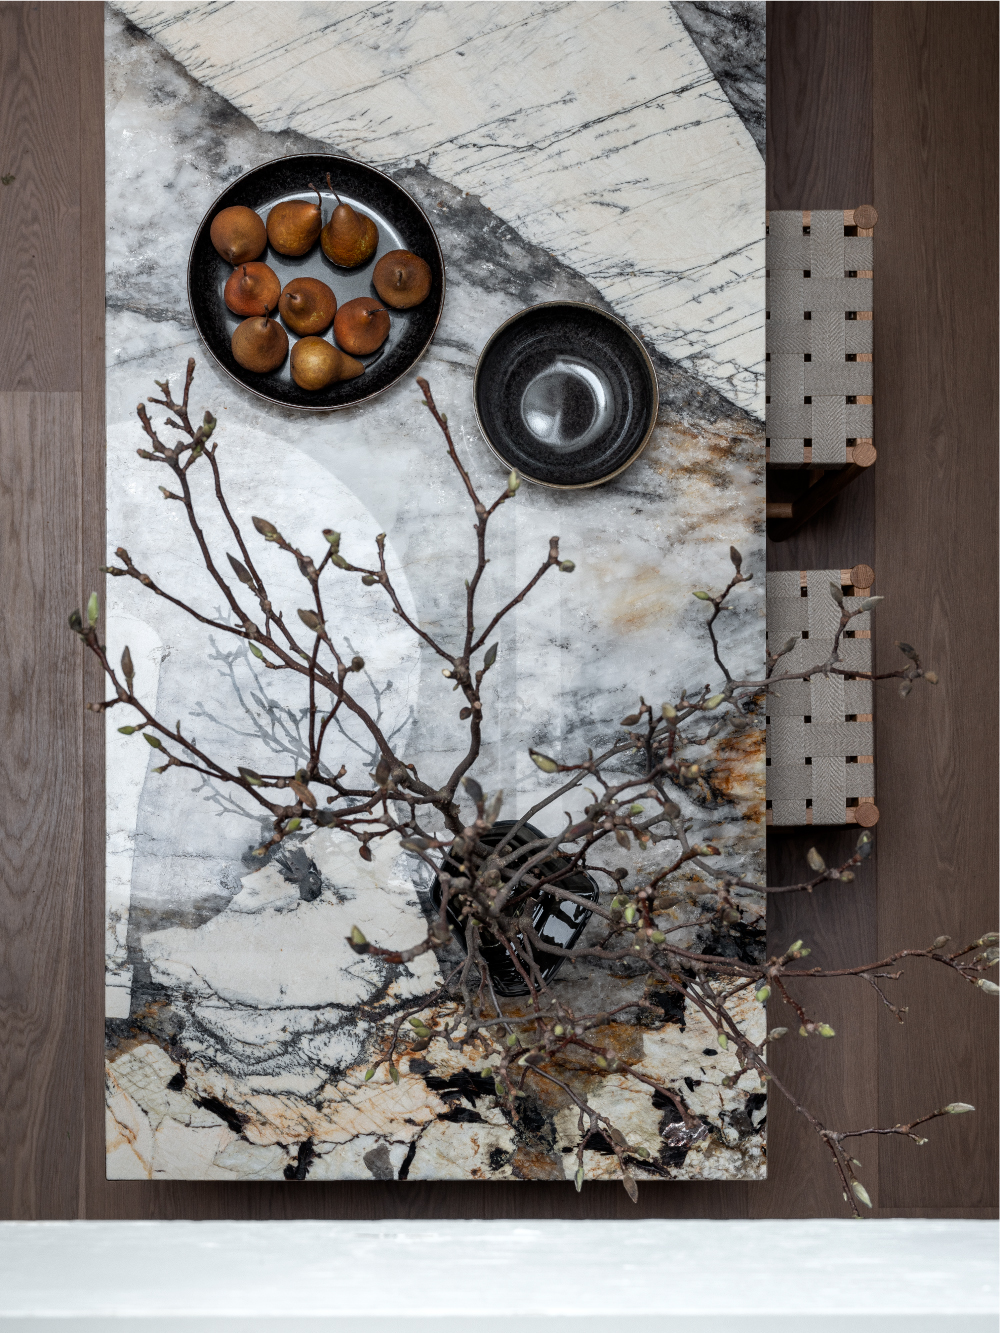 Patagonia Alpha Granite is a remarkable natural stone that now holds a permanent position on our grid. Its speckled appearance and superior durability make it perfect for benchtops.